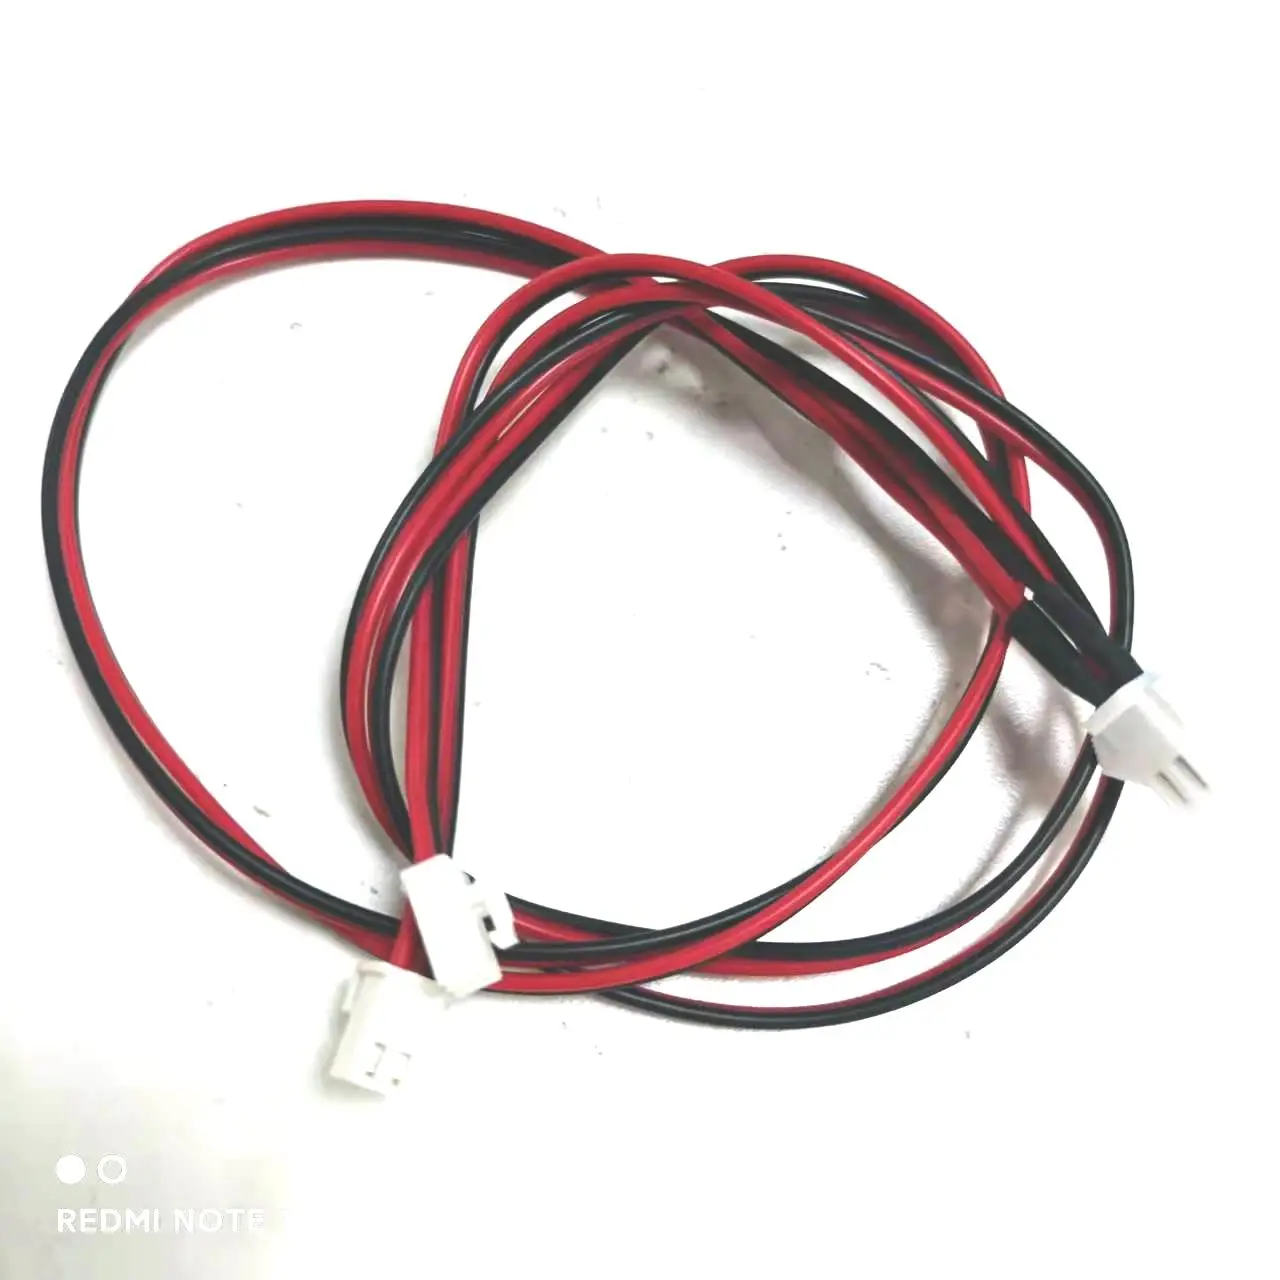 Factory cable harness assembly manufacturer